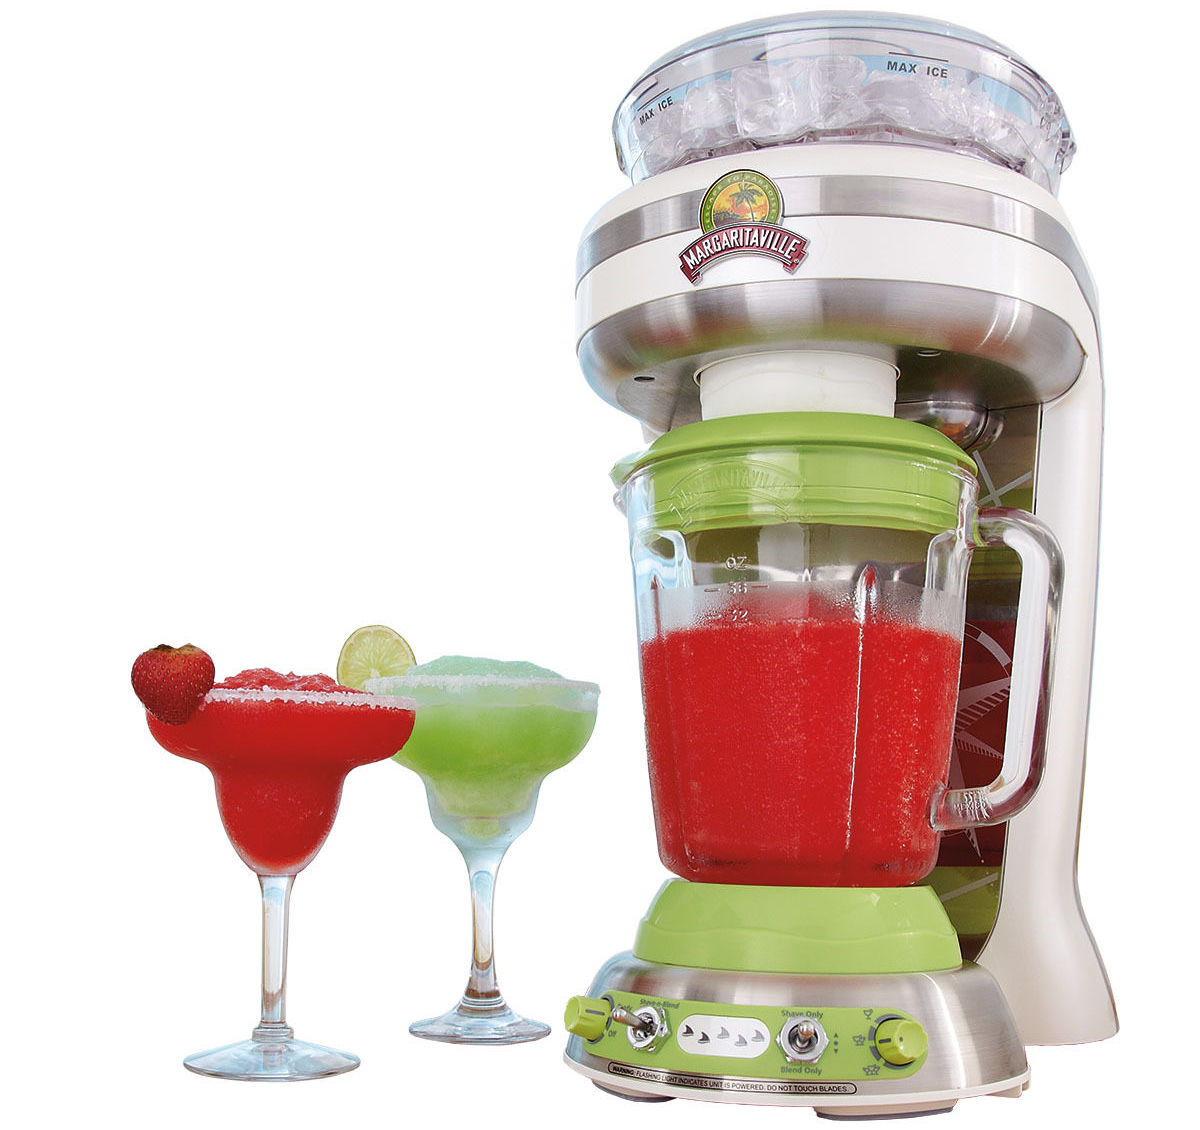 https://9to5toys.com/wp-content/uploads/sites/5/2015/05/margaritaville-frozen-concoction-maker-with-easy-pour-jar-and-mixing-tool-dm1500-sale-01.jpg